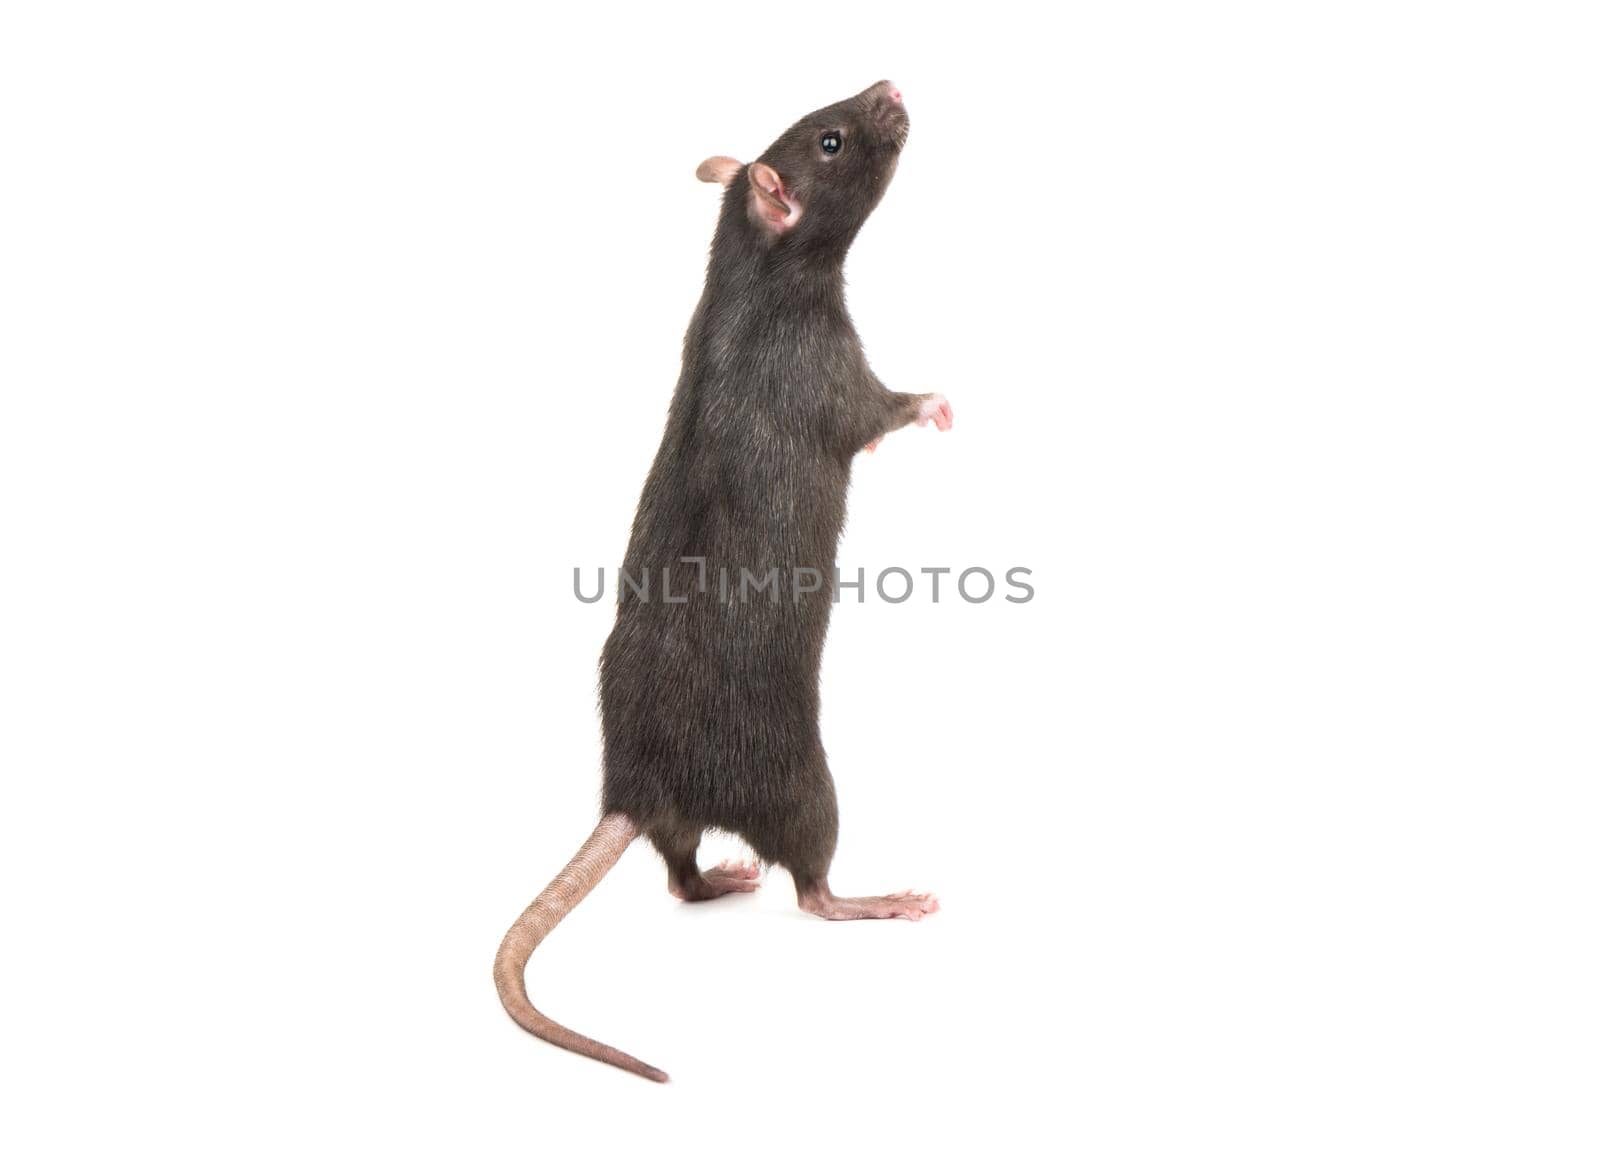 Gray rat standing on hind legs on white background